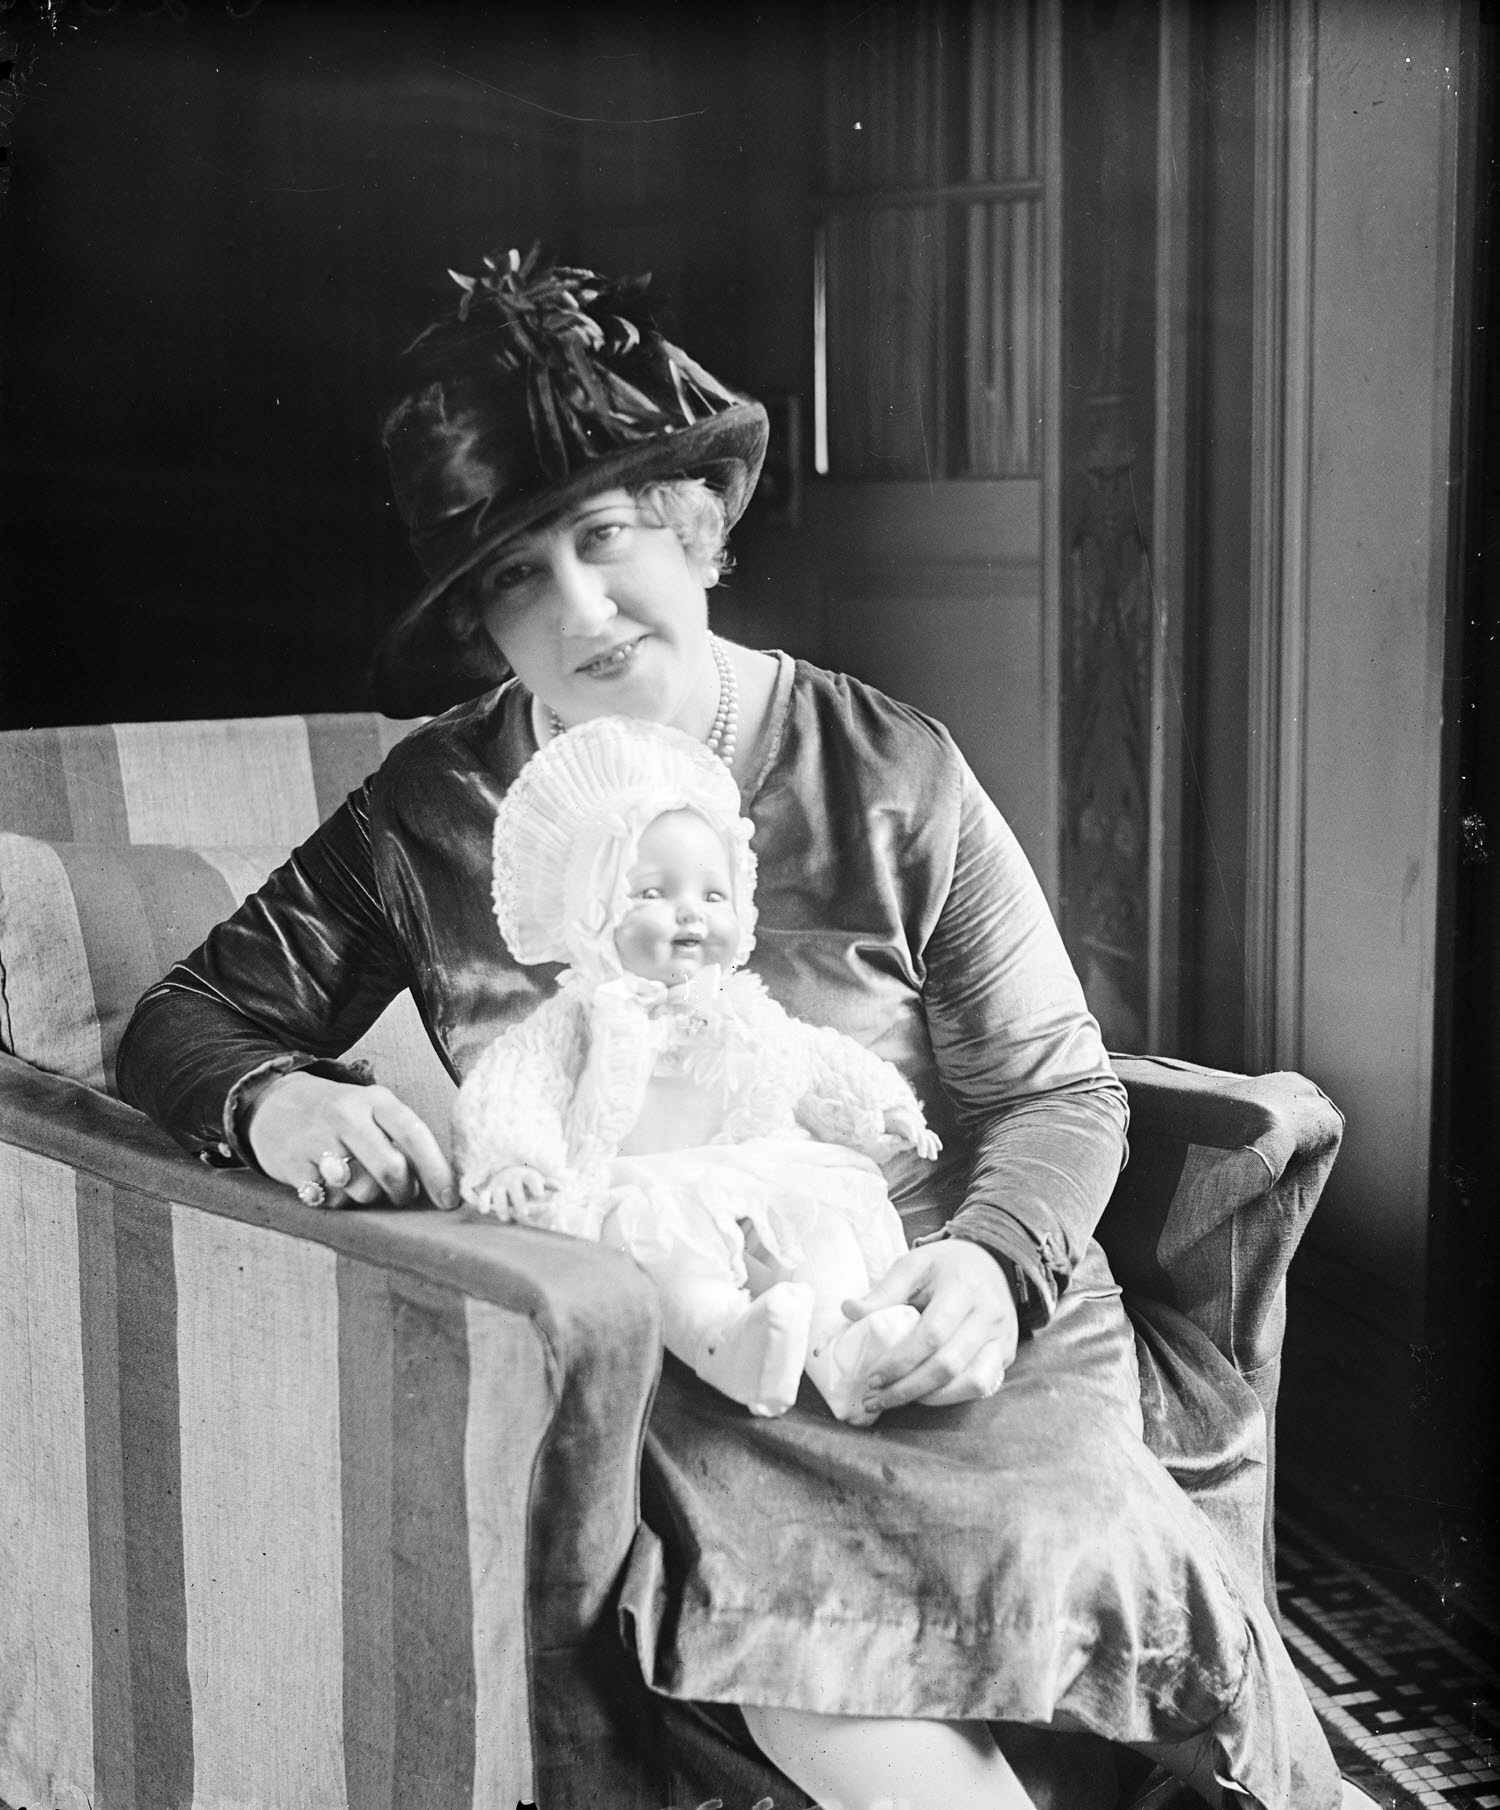 A woman, sitting in a chair smiling, wearing a fashionable hat and holding a lifelike baby doll 